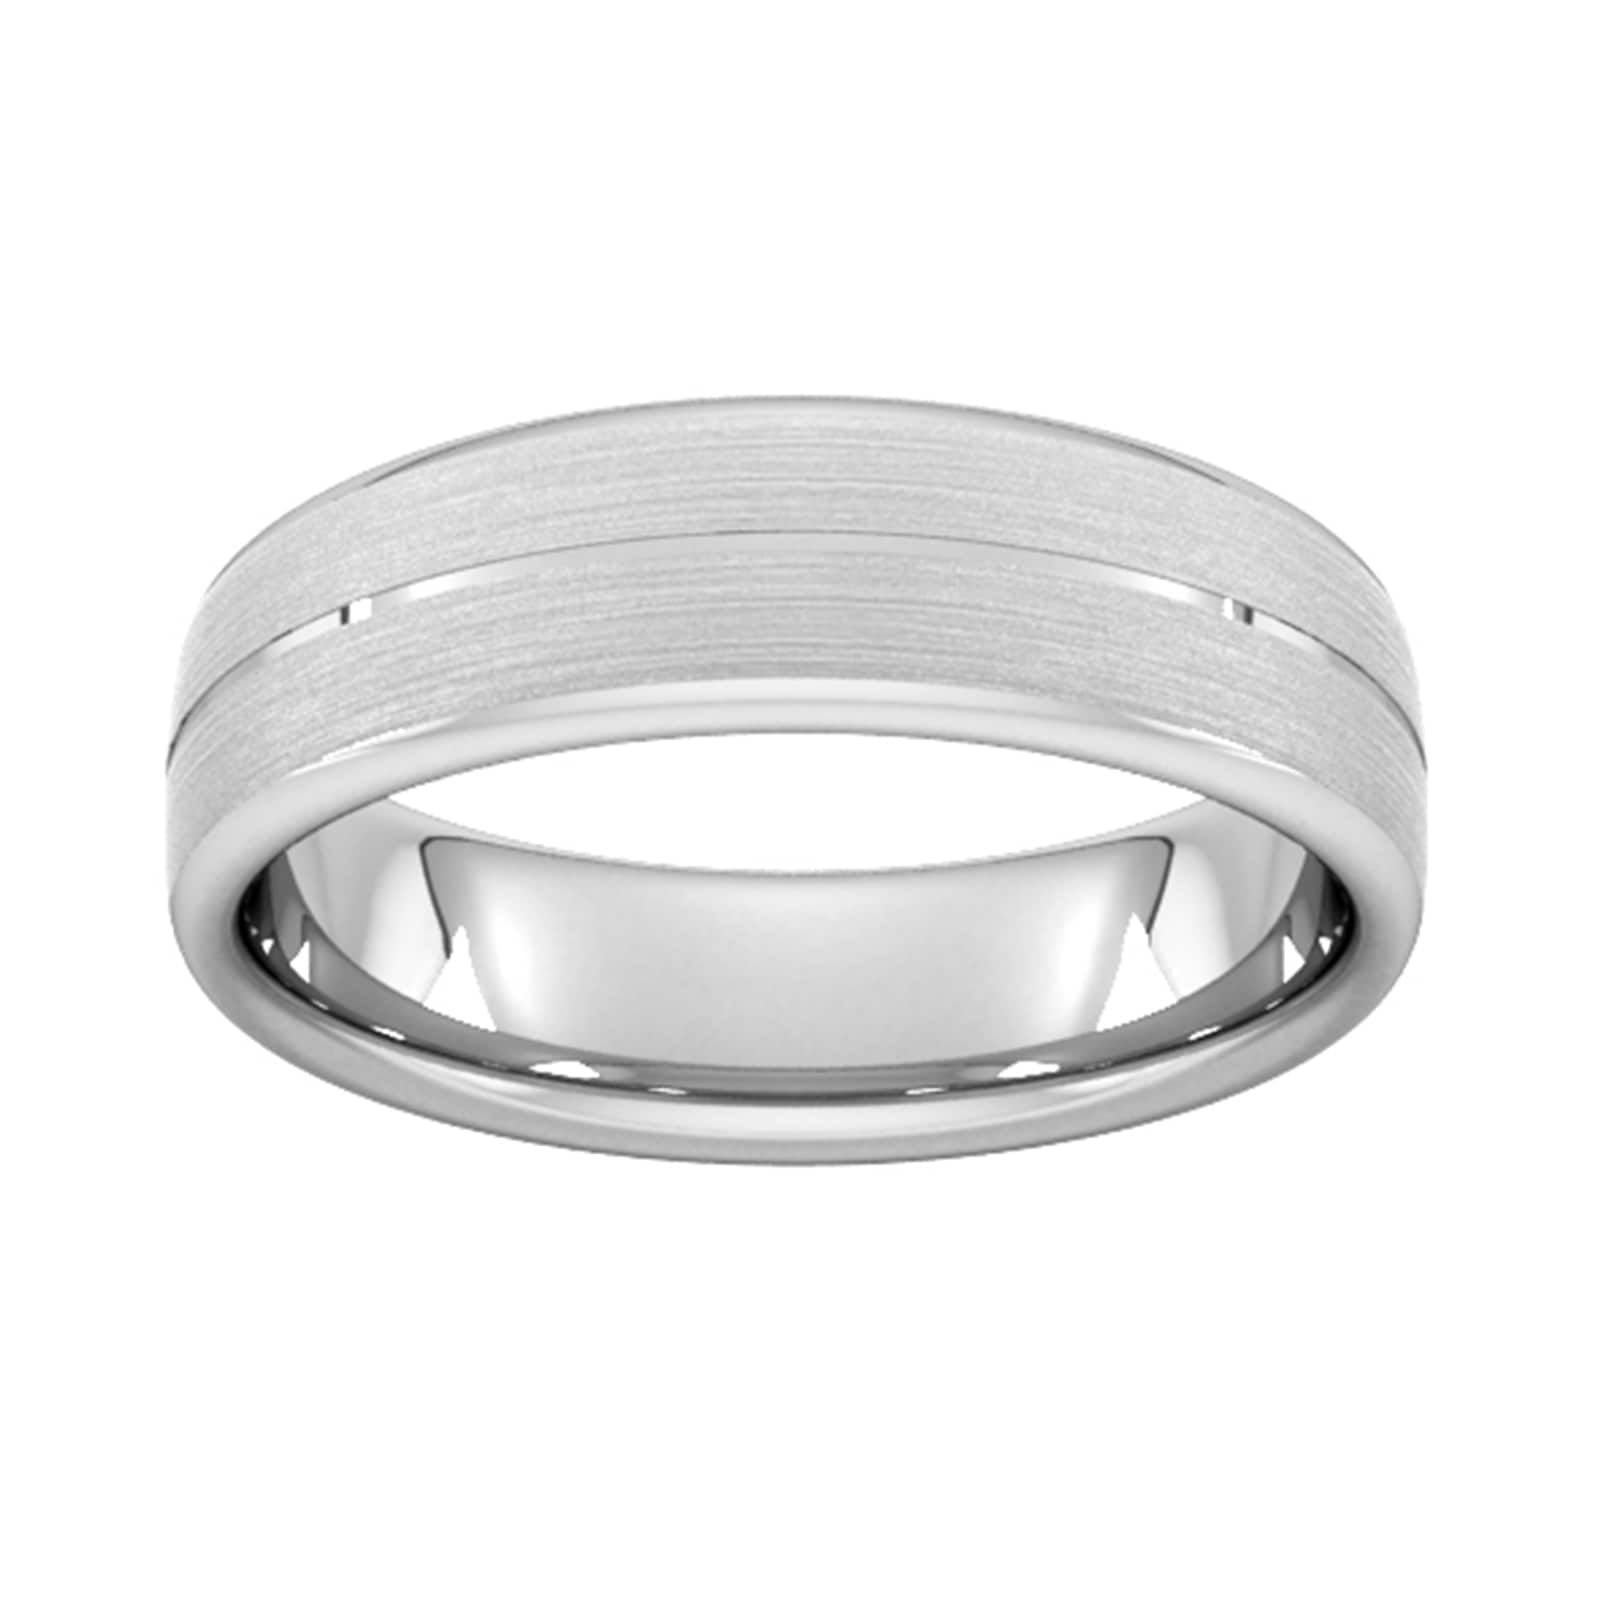 6mm Slight Court Extra Heavy Centre Groove With Chamfered Edge Wedding Ring In 9 Carat White Gold - Ring Size H